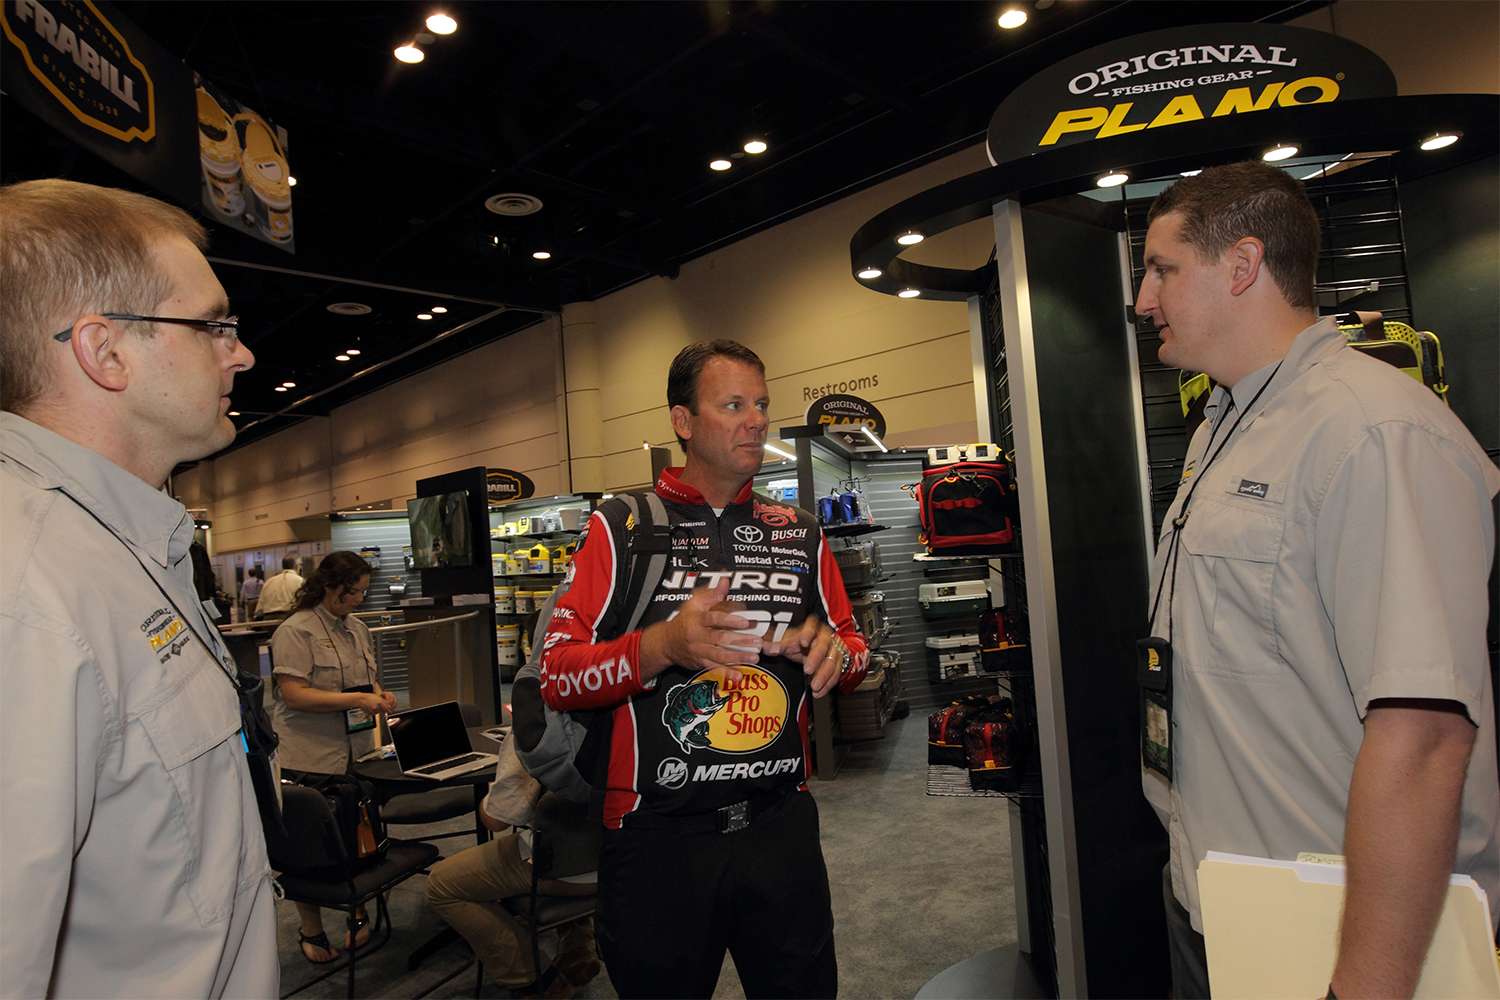 Kevin VanDam sees what he can do for the Plano crew.